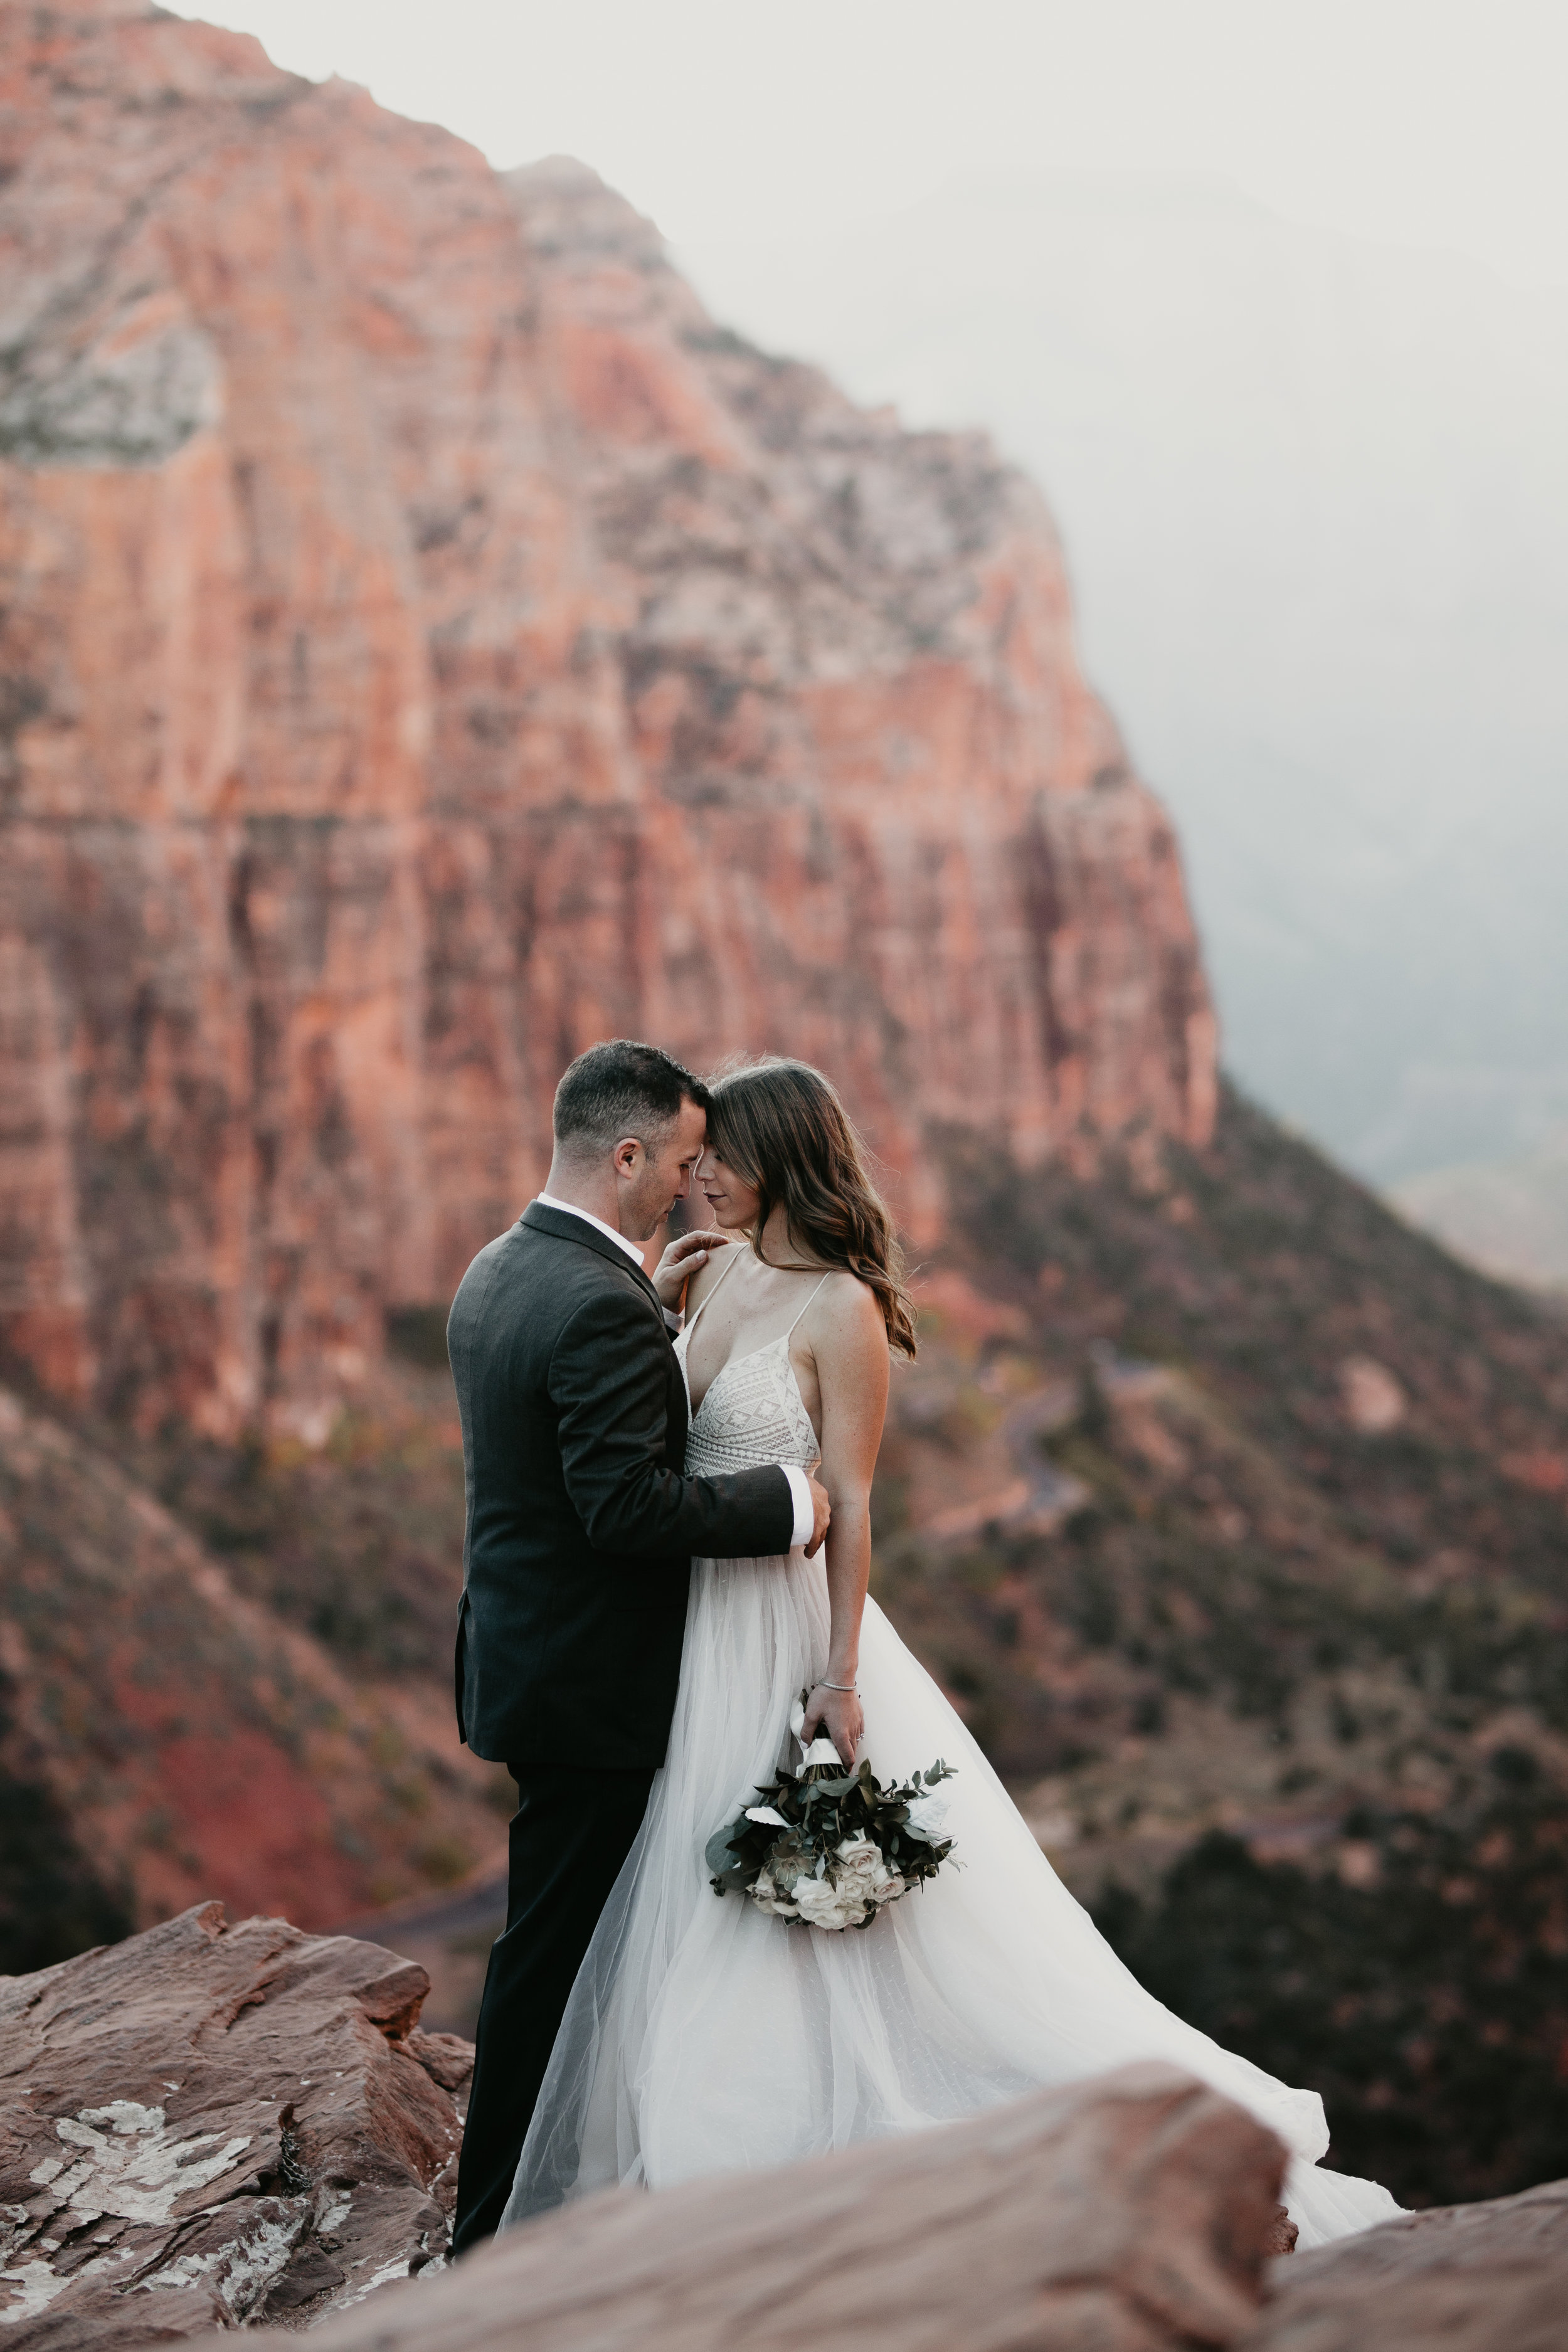 nicole-daacke-photography-zion-national-park-elopement-photographer-canyon-overlook-trail-elope-hiking-adventure-wedding-photos-fall-utah-red-rock-canyon-stgeorge-eloping-photographer-44.jpg